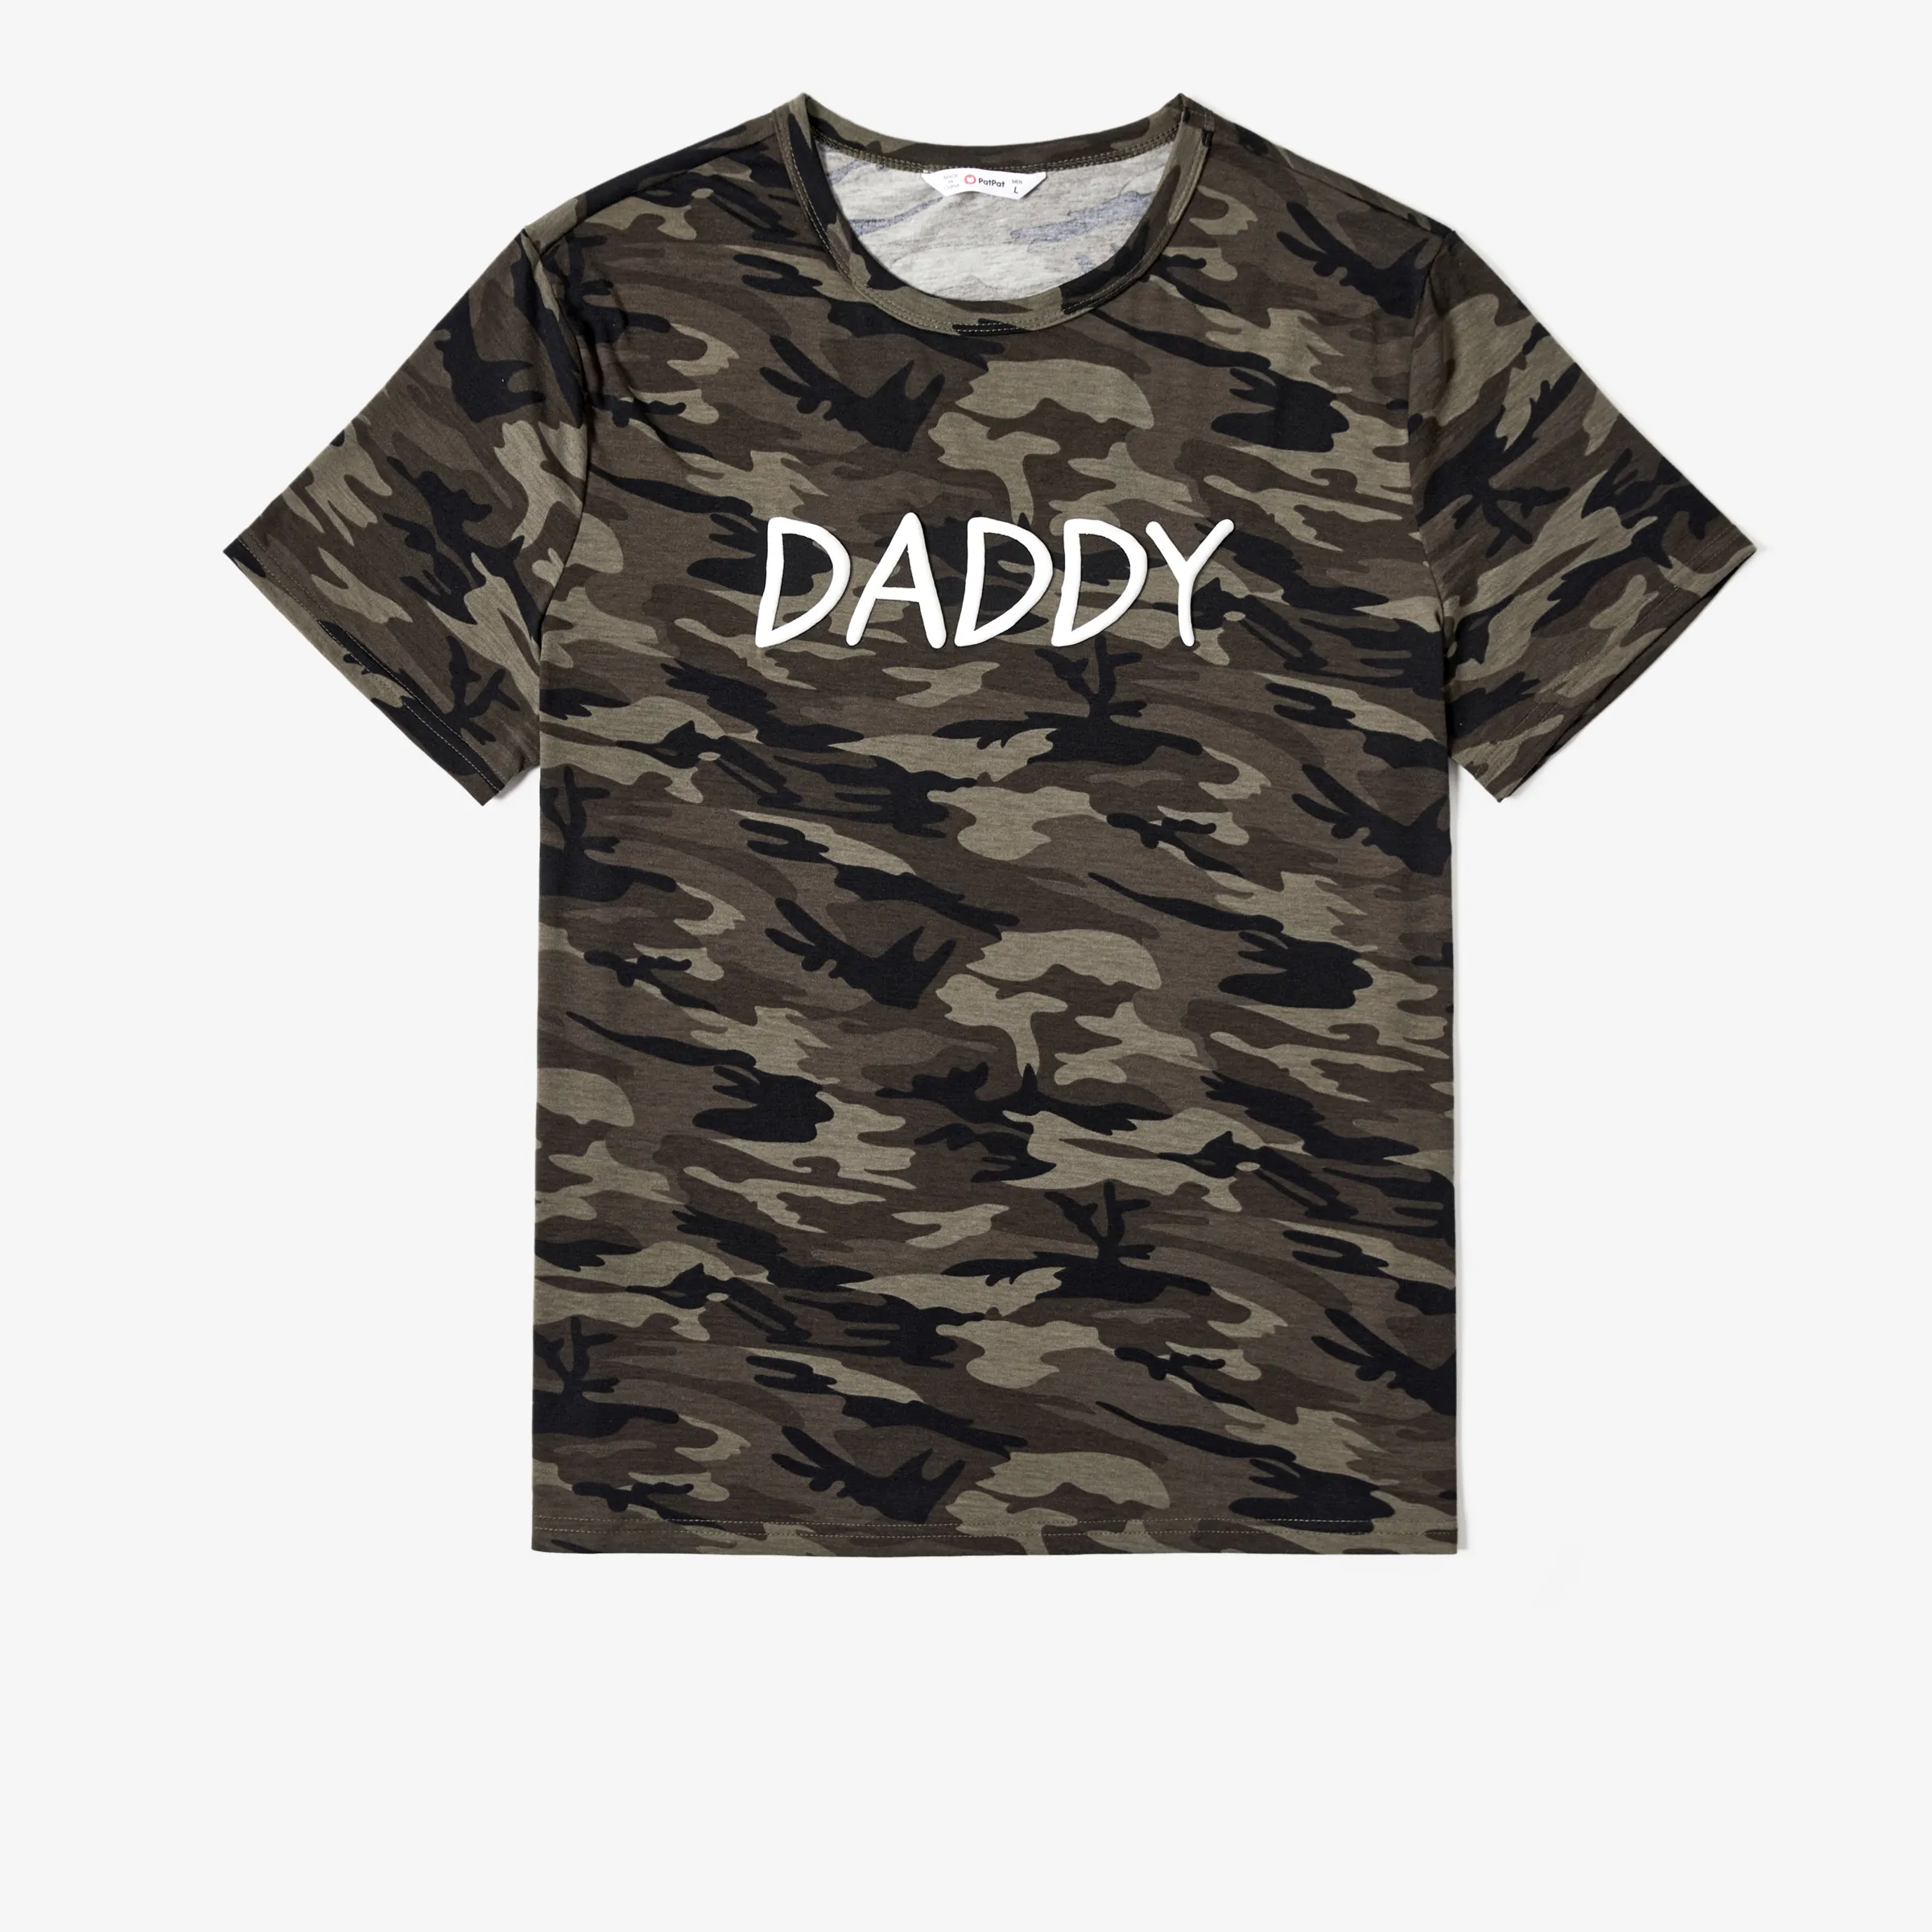 Family Matching Camo Letter Printed Short Sleeves Tops